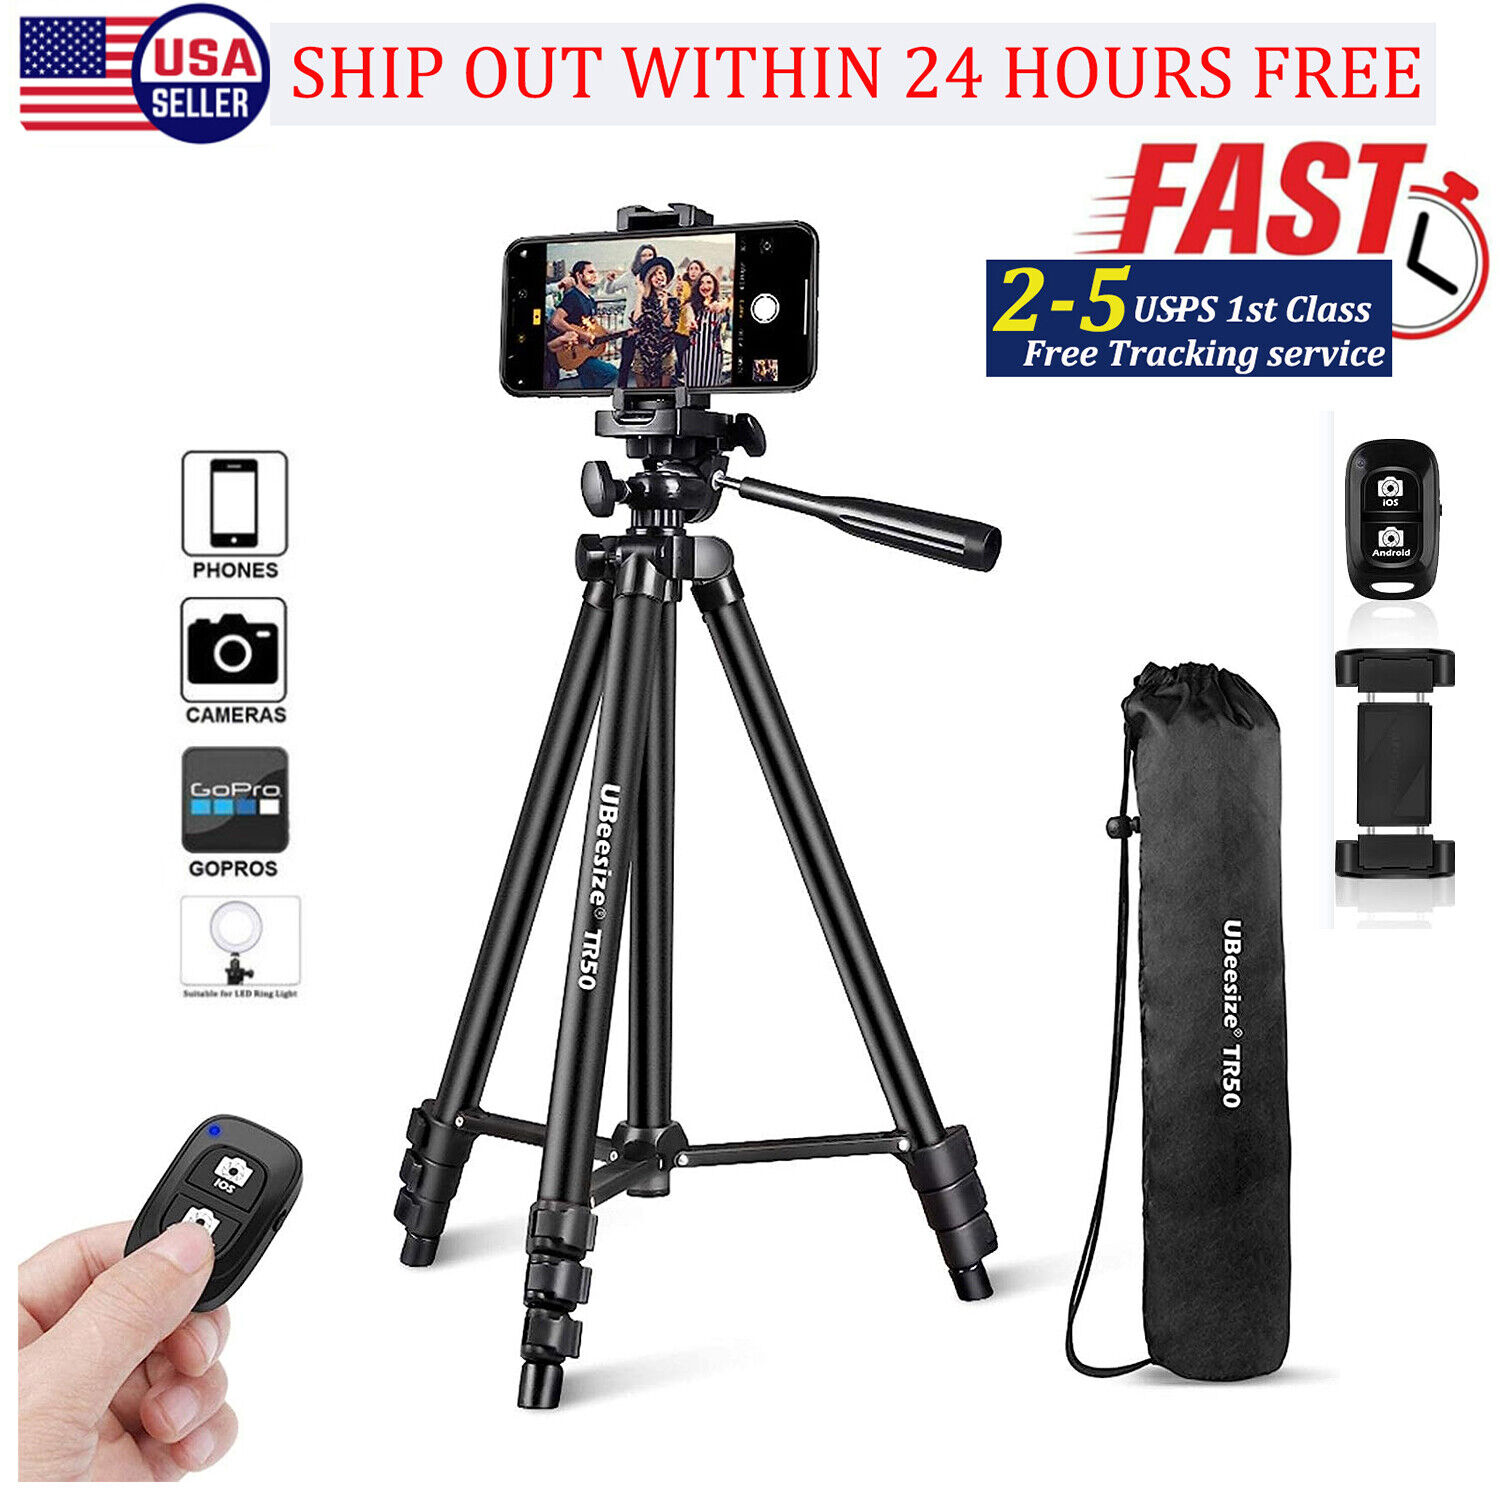 Universal Camera Tripod Stand Holder Mount Remote For iPhone Samsung Cell Phone